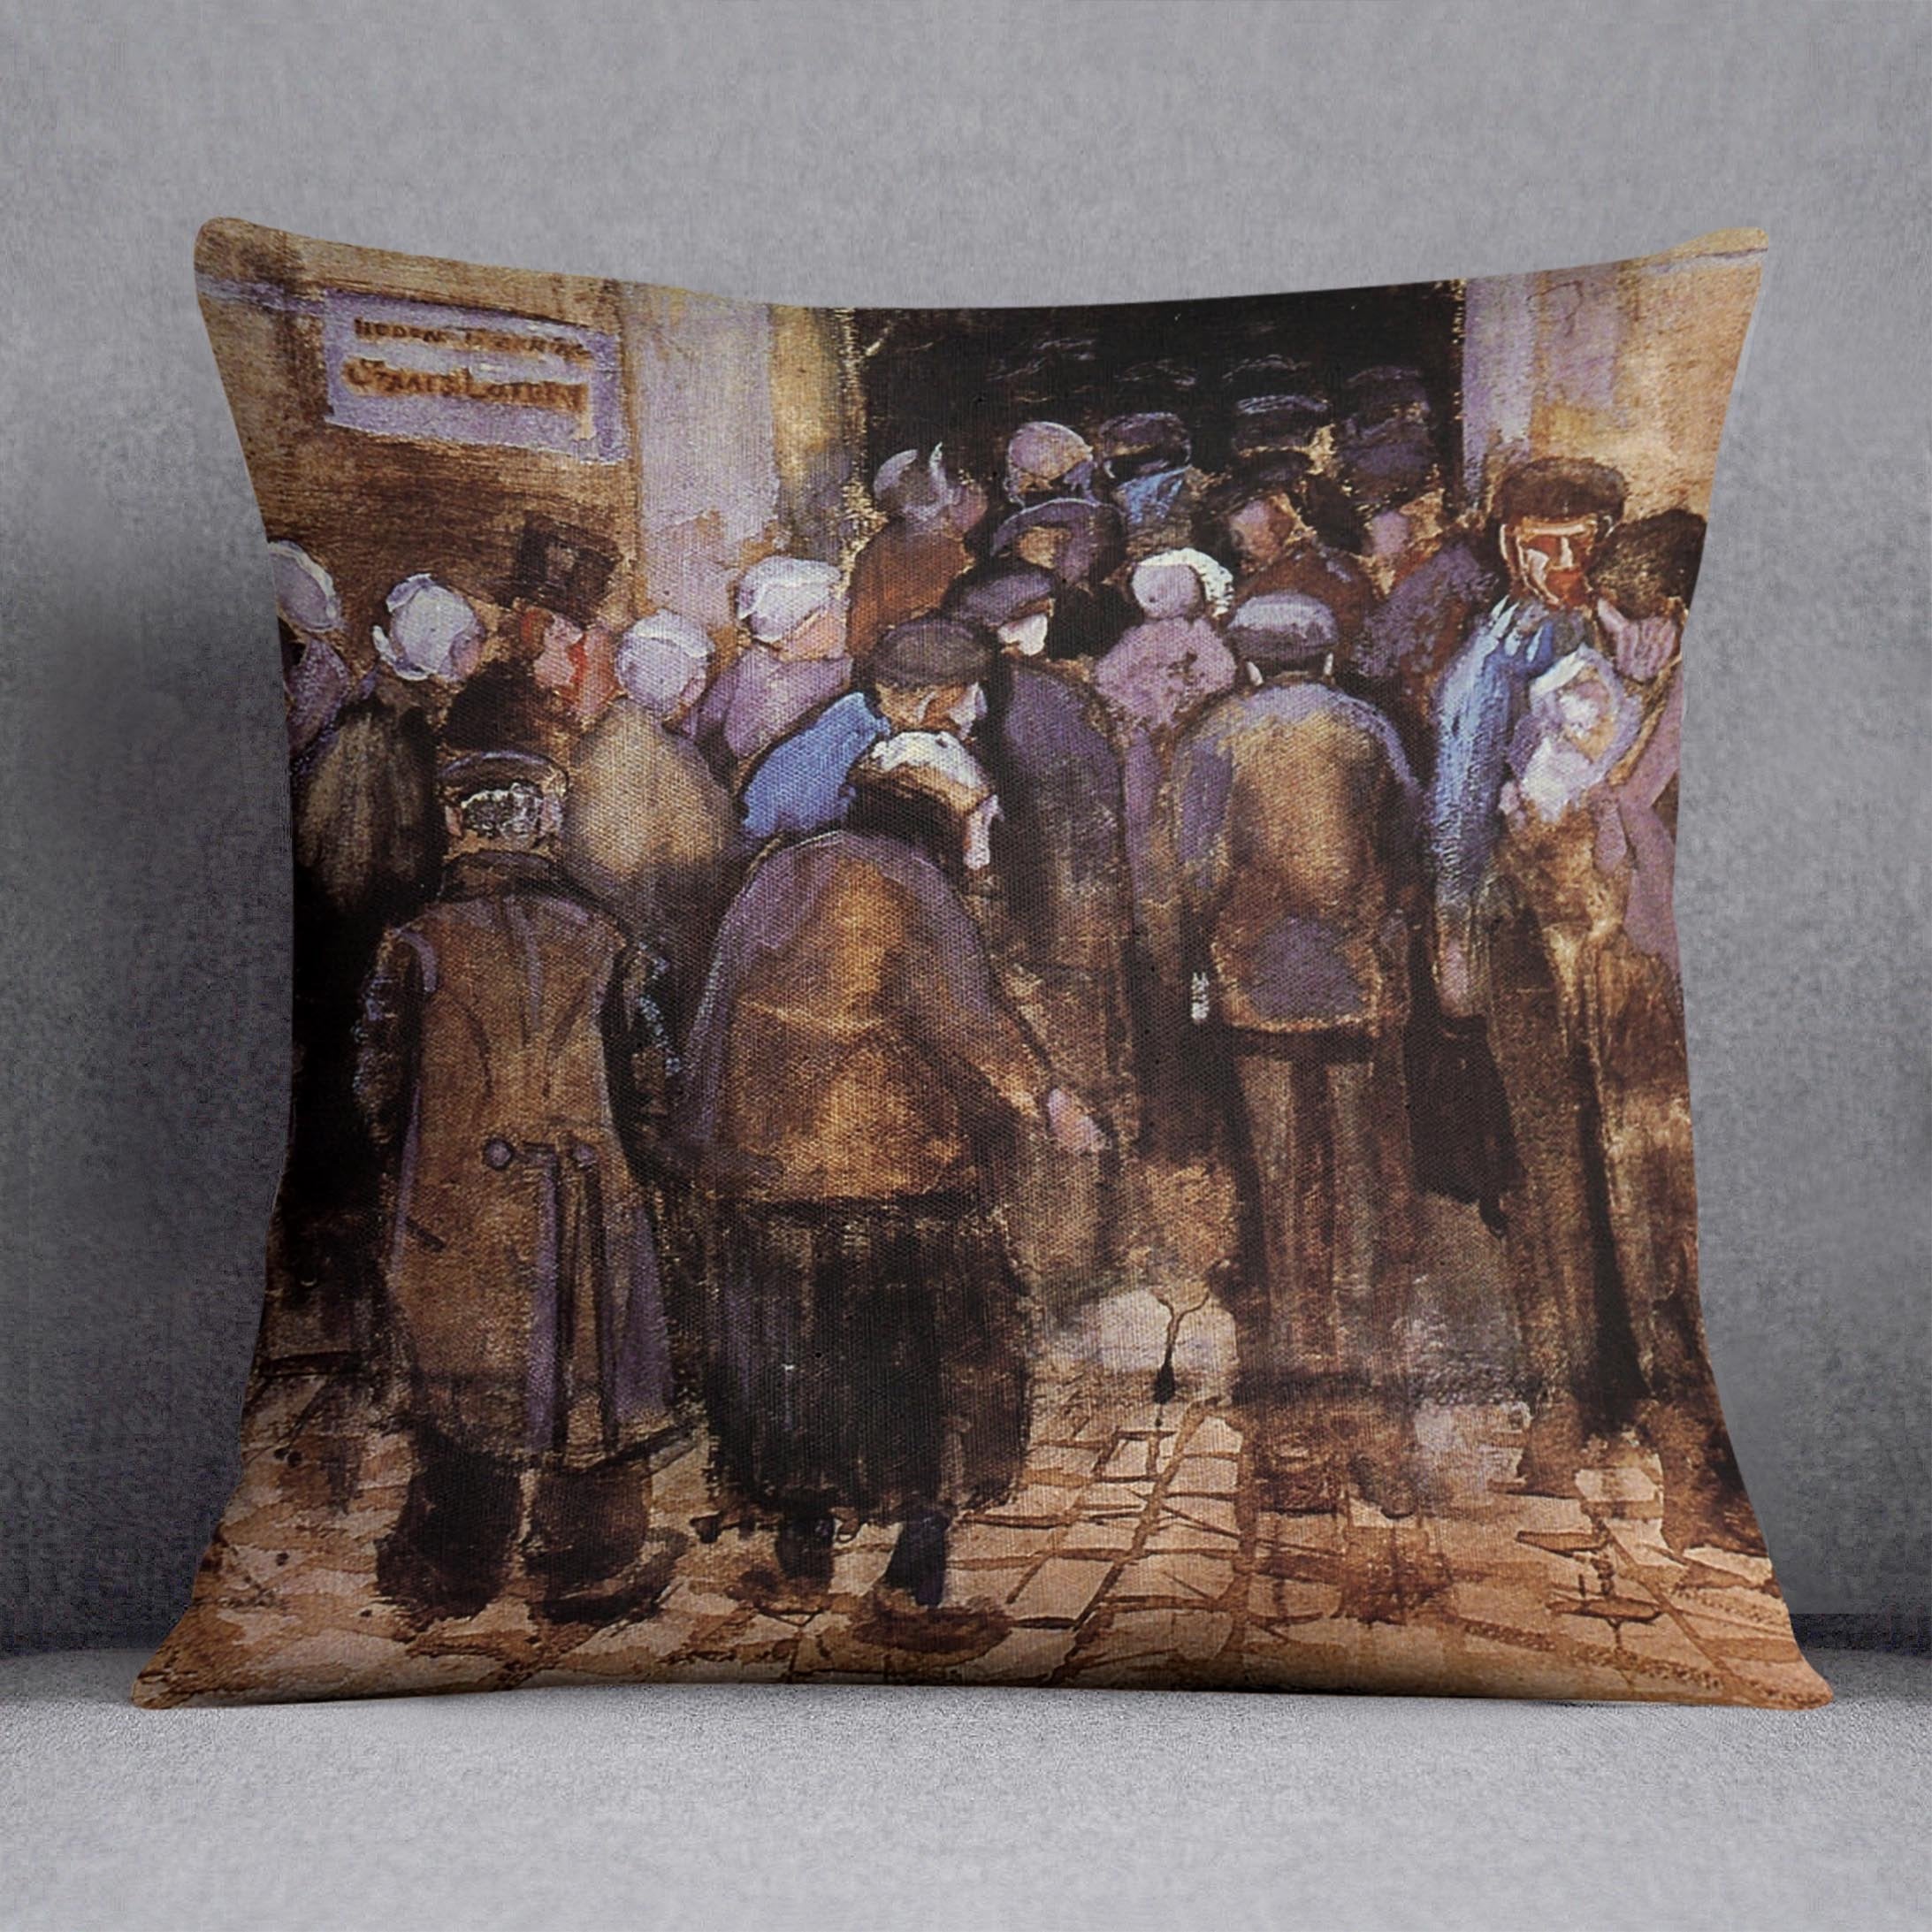 The poor and money by Van Gogh Throw Pillow